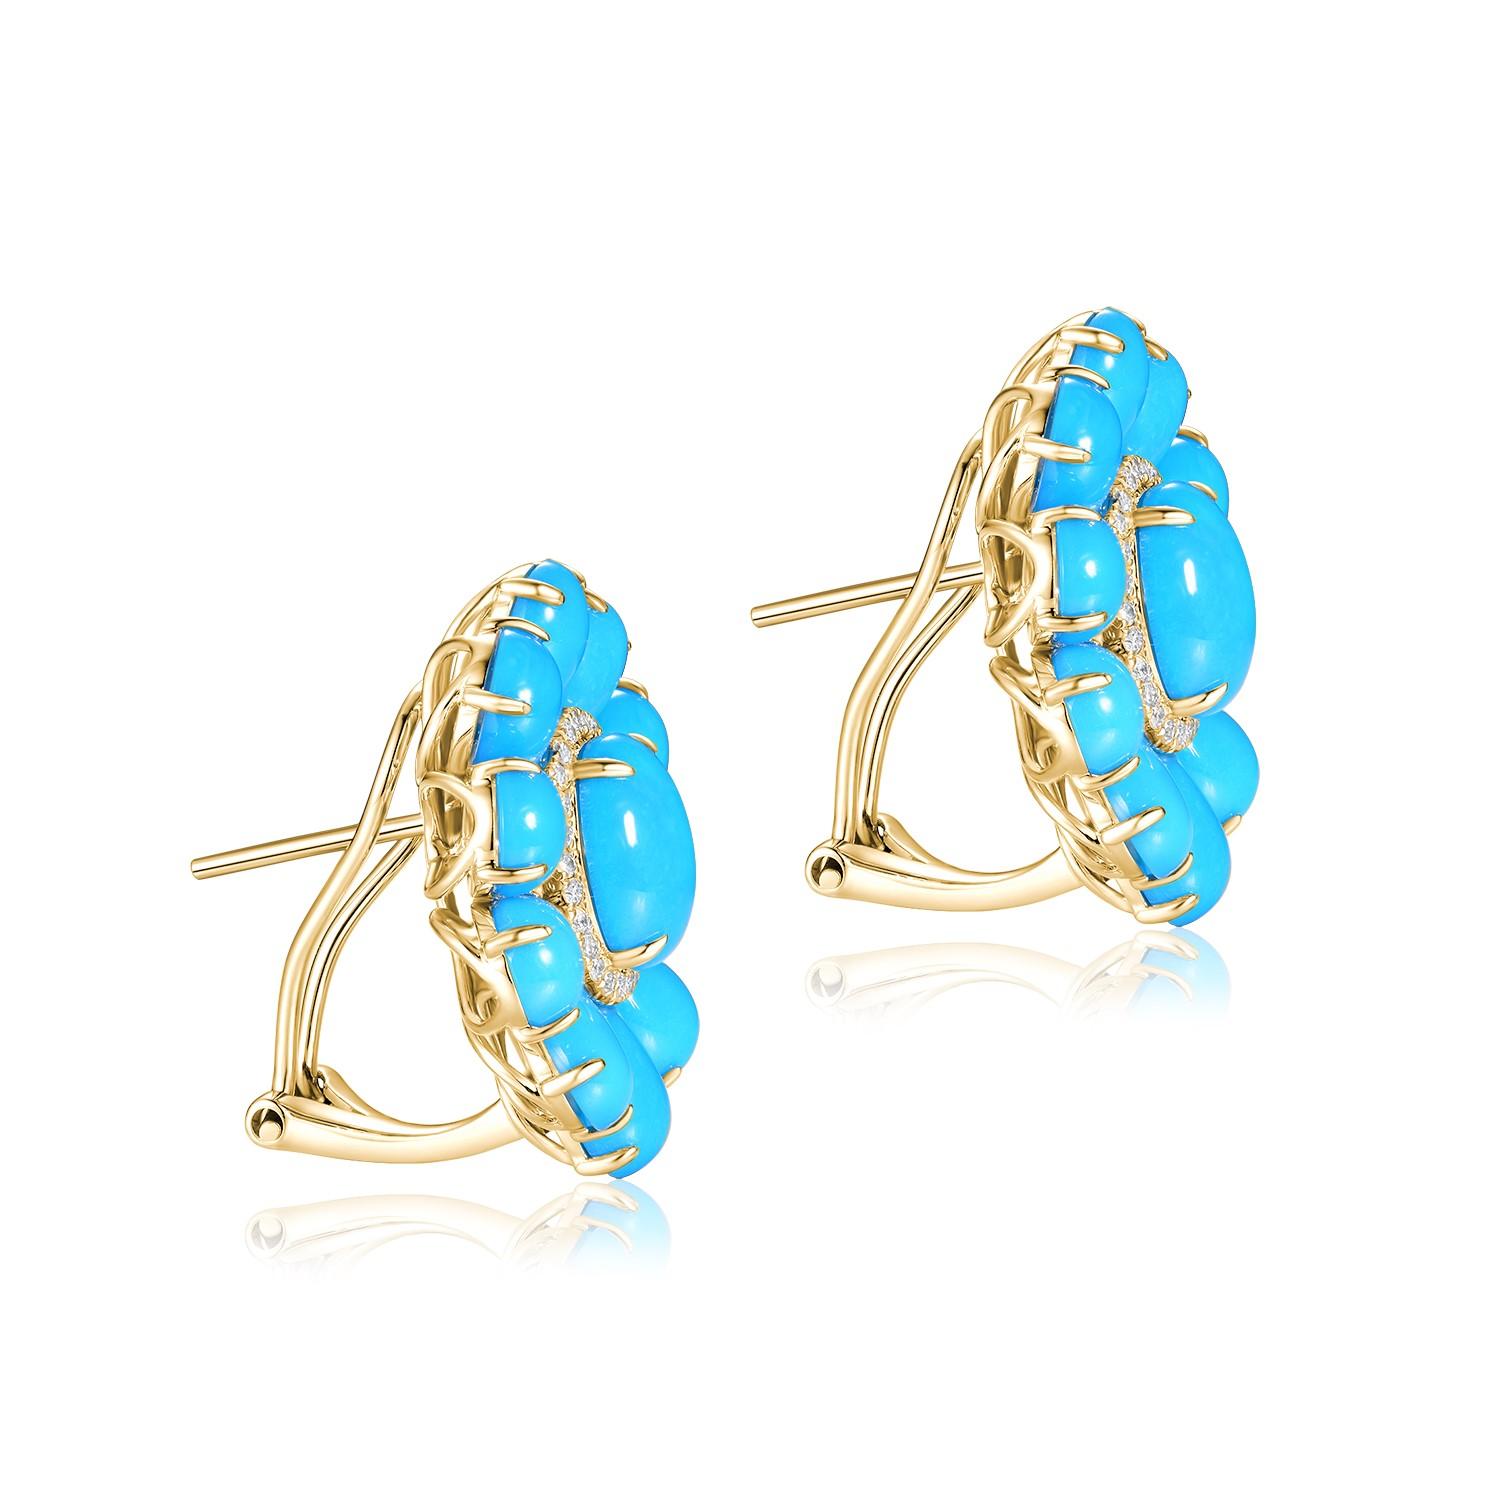 The Turquoise Diamond Earrings are a striking pair of earrings that beautifully showcase the vibrant hues of turquoise and the sparkling brilliance of diamonds. Crafted in 14 karat yellow gold, these earrings exude elegance and sophistication.

The